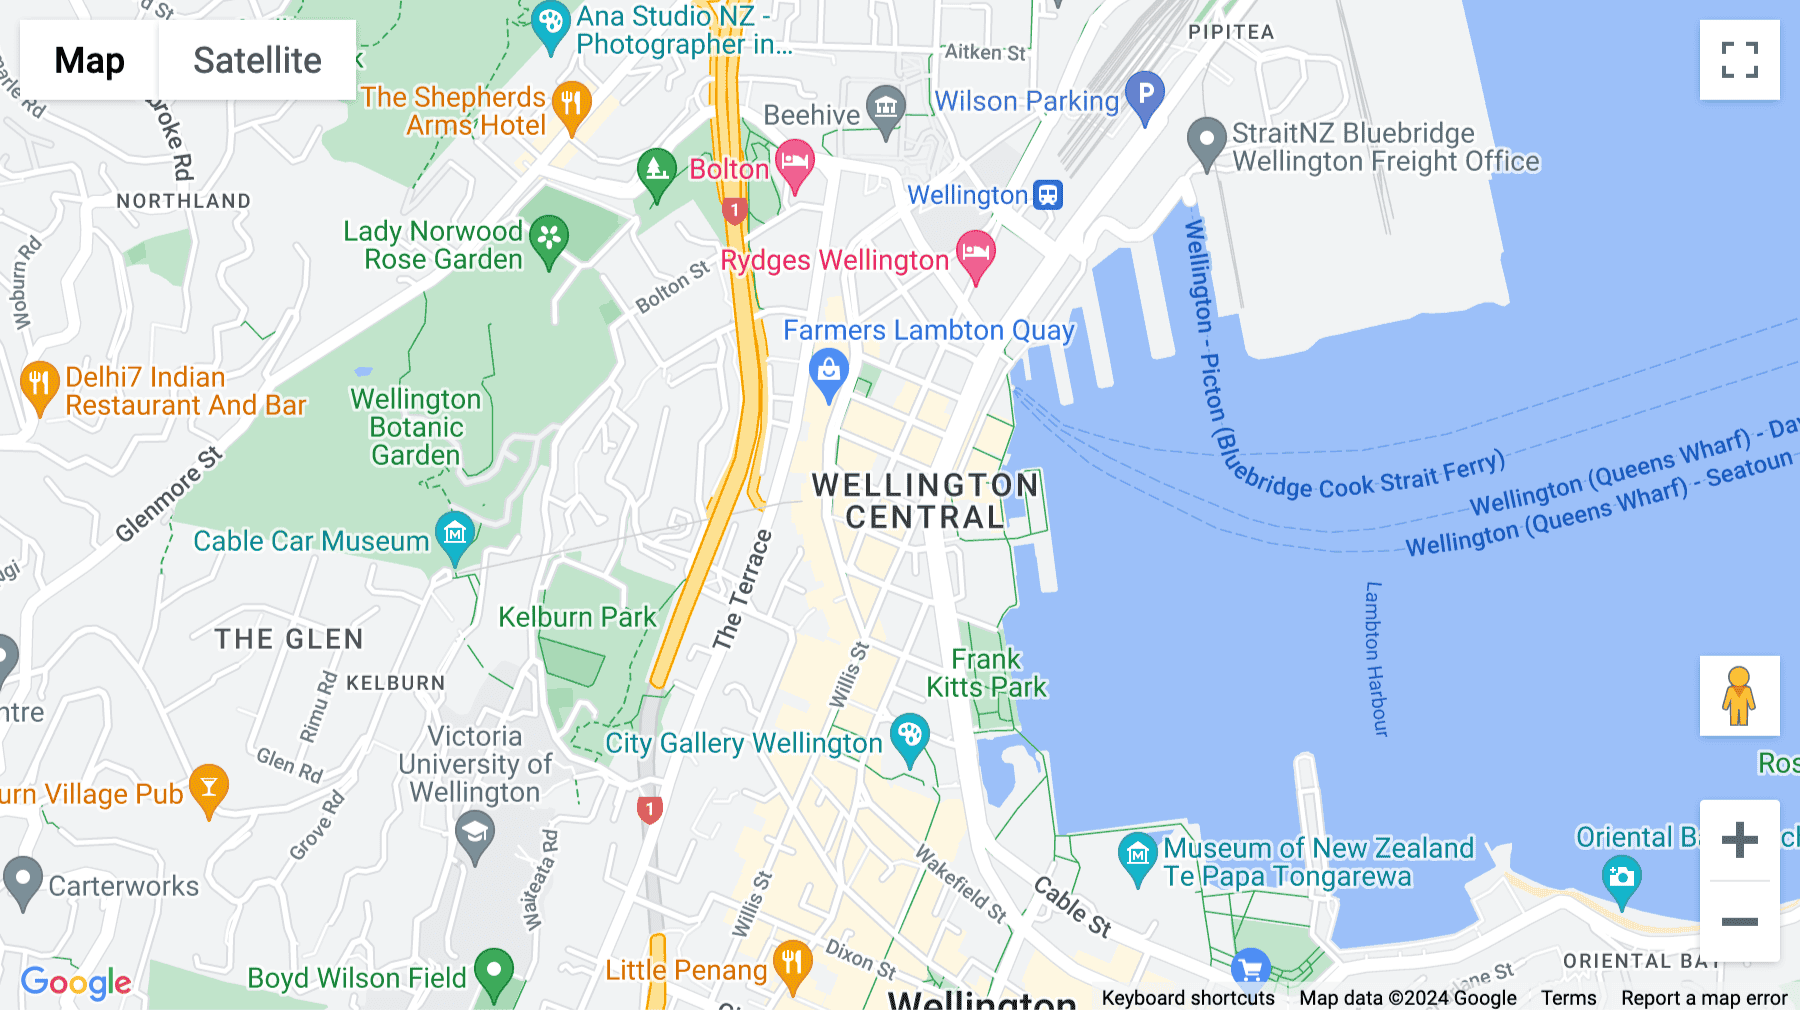 Click for interative map of Level 15 HP Tower, 171 Featherston Street, Wellington